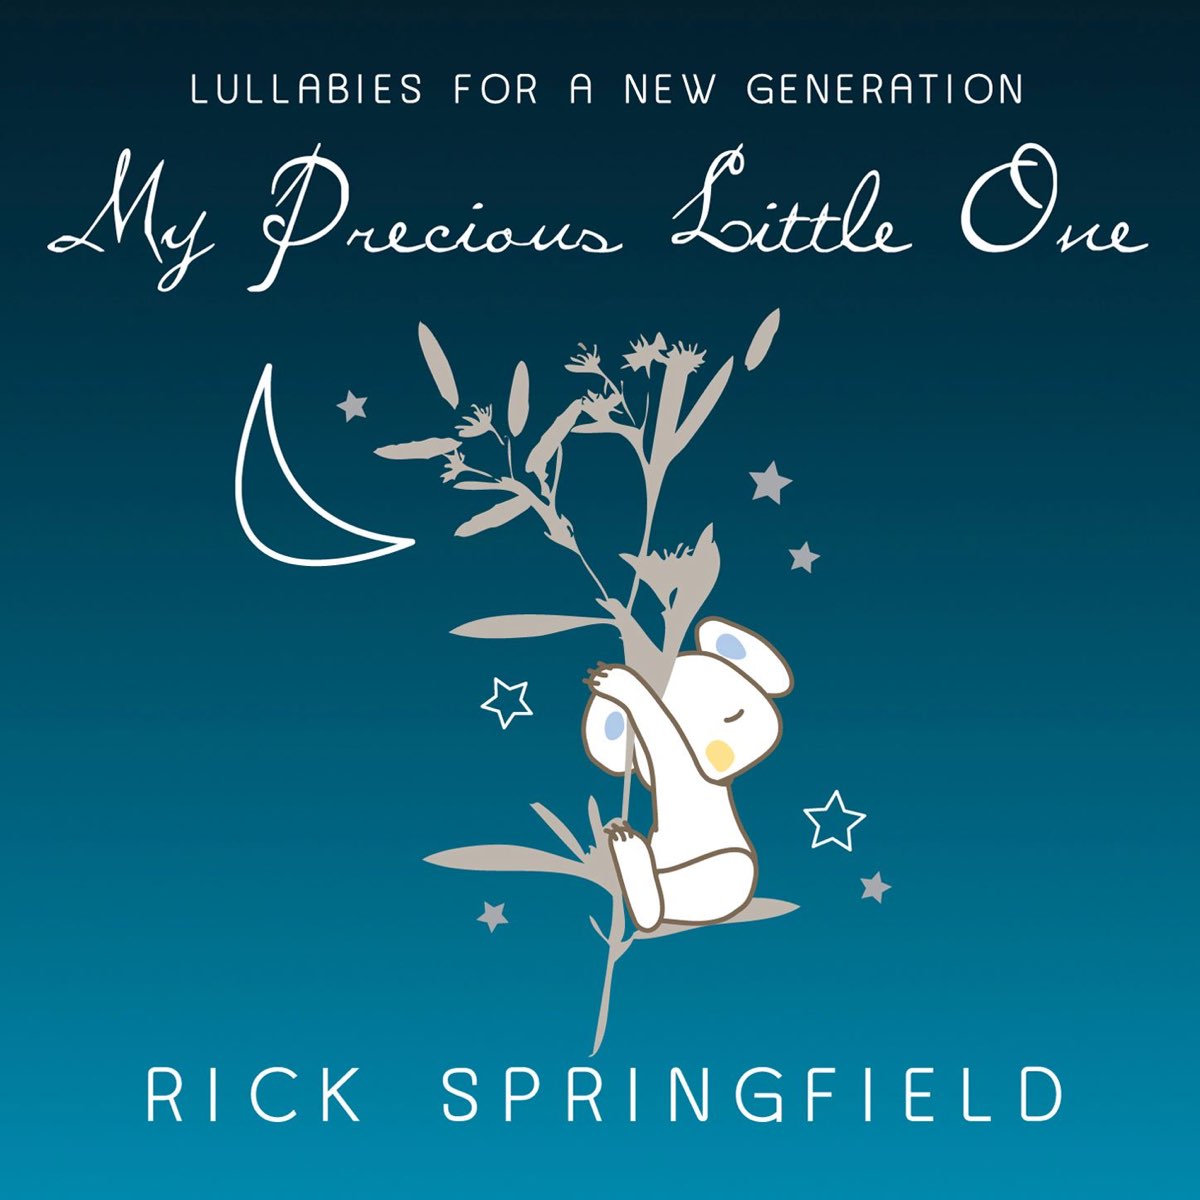 My Precious Babe One By Rick Springfield On Apple Music